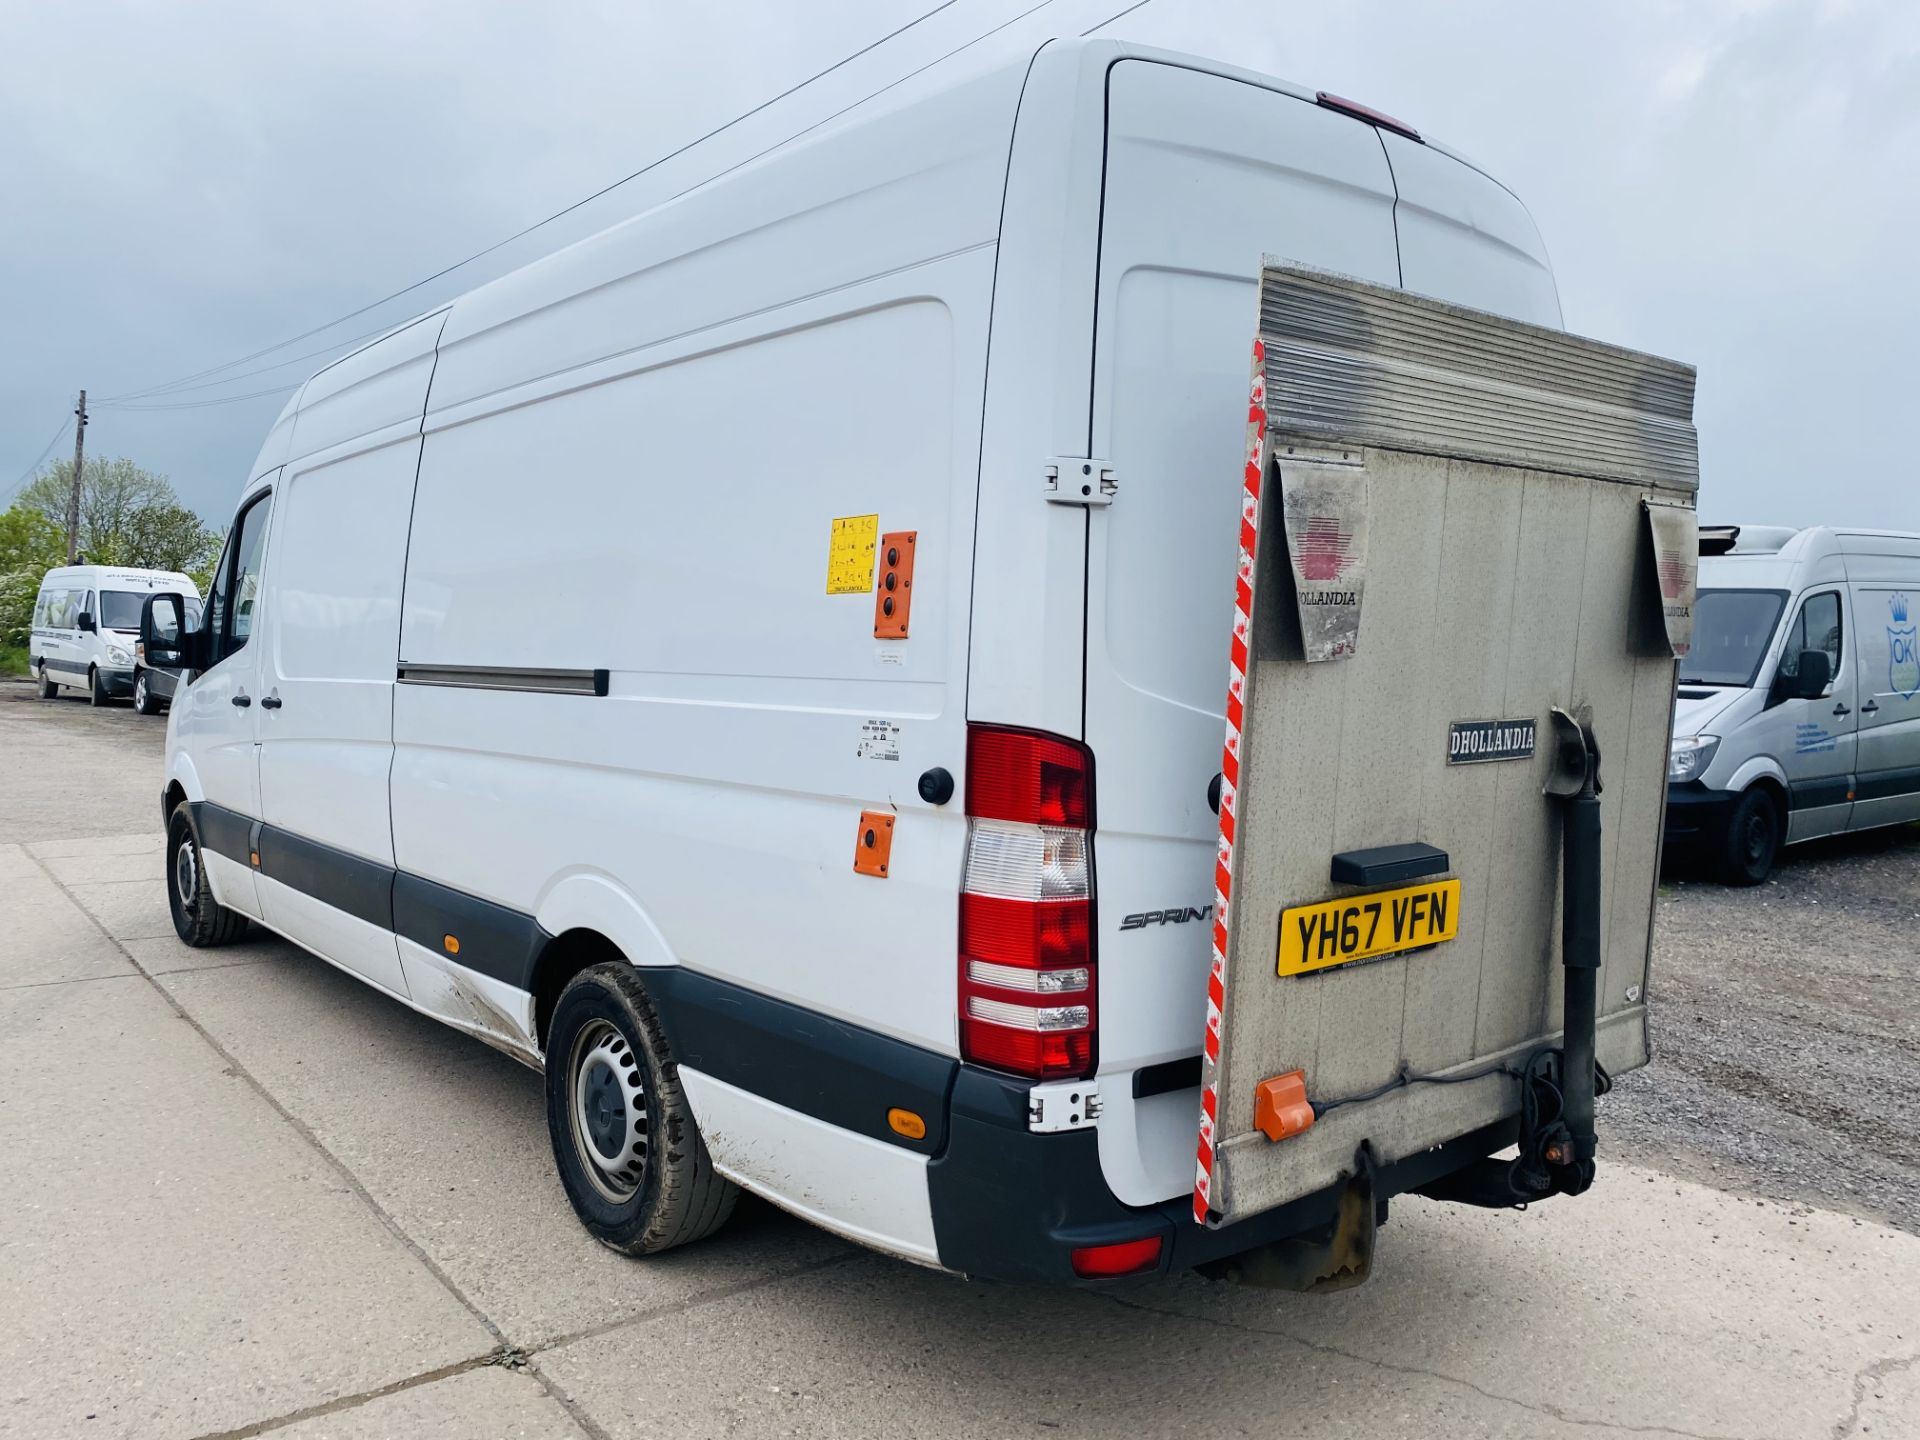 MERCEDES SPRINTER 314CDI "LWB" HIGH ROOF WITH FULL ELECTRIC TAIL-LIFT - 2018 MODEL - 1 OWNER - FSH - Image 3 of 18